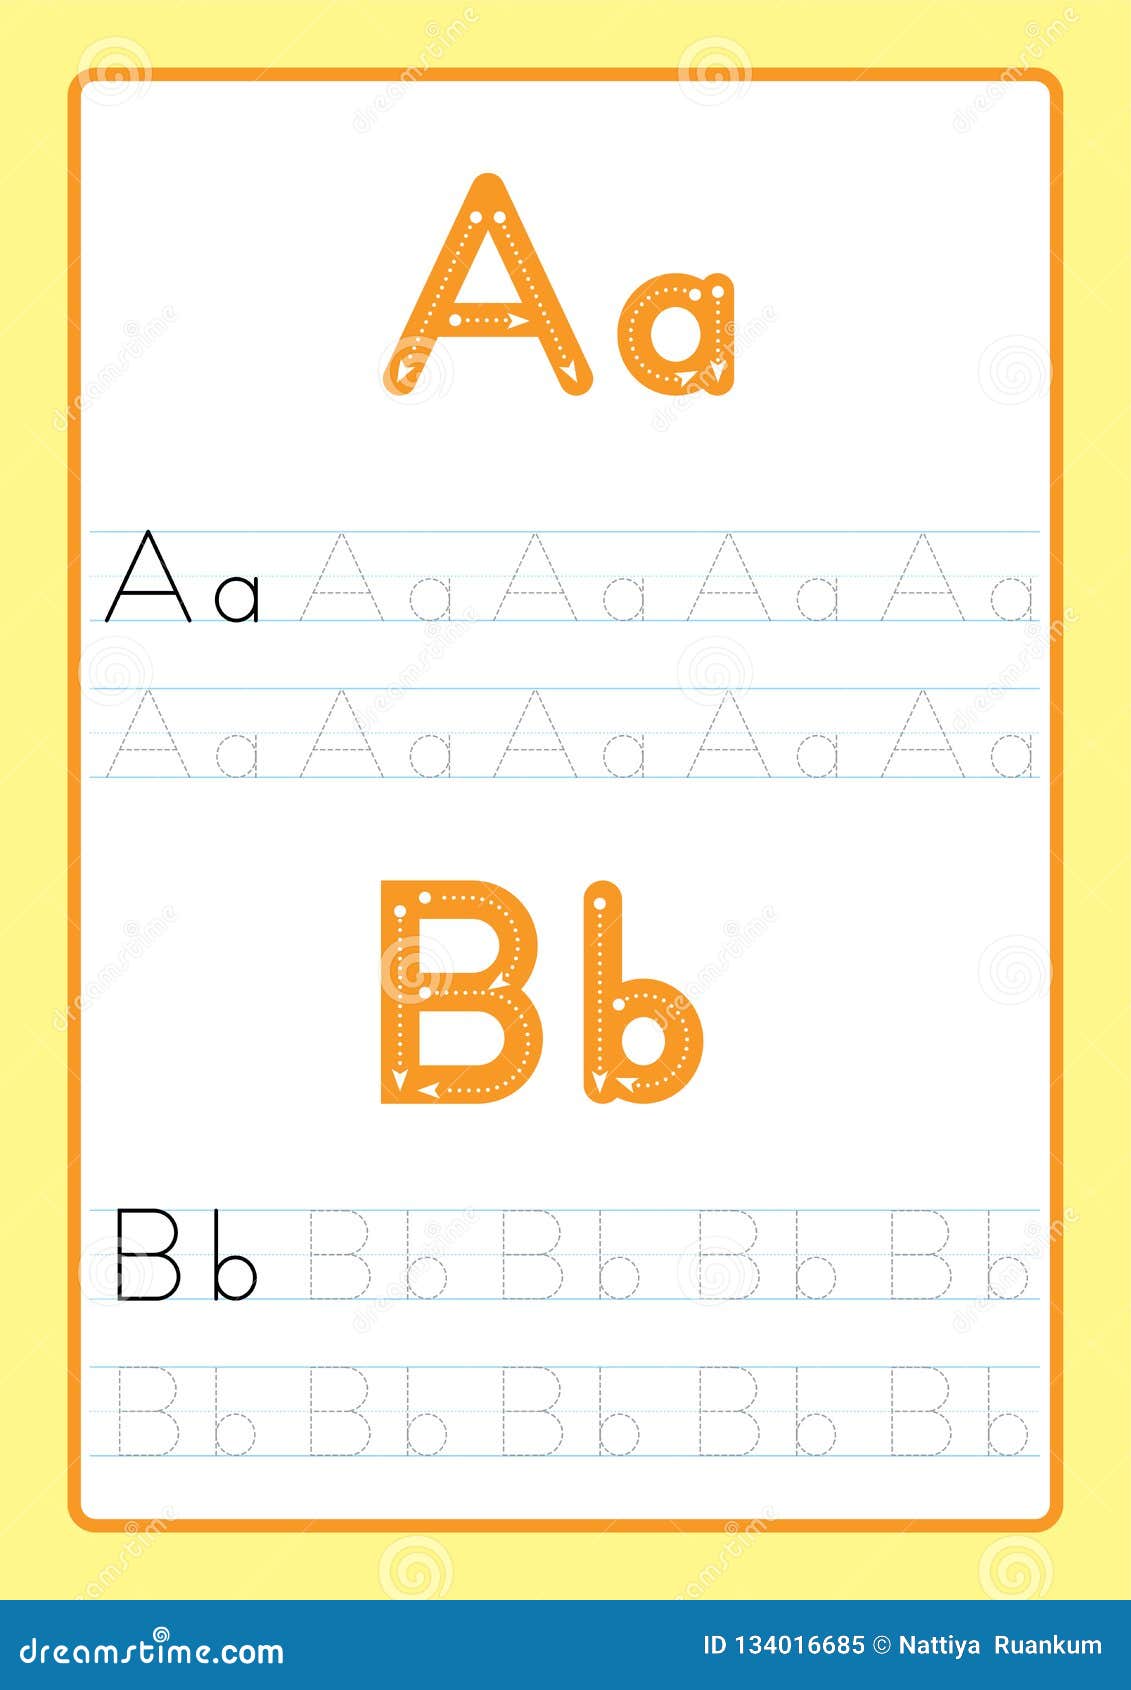 ABC Alphabet Letters Tracing Worksheet With Alphabet Letters. Basic